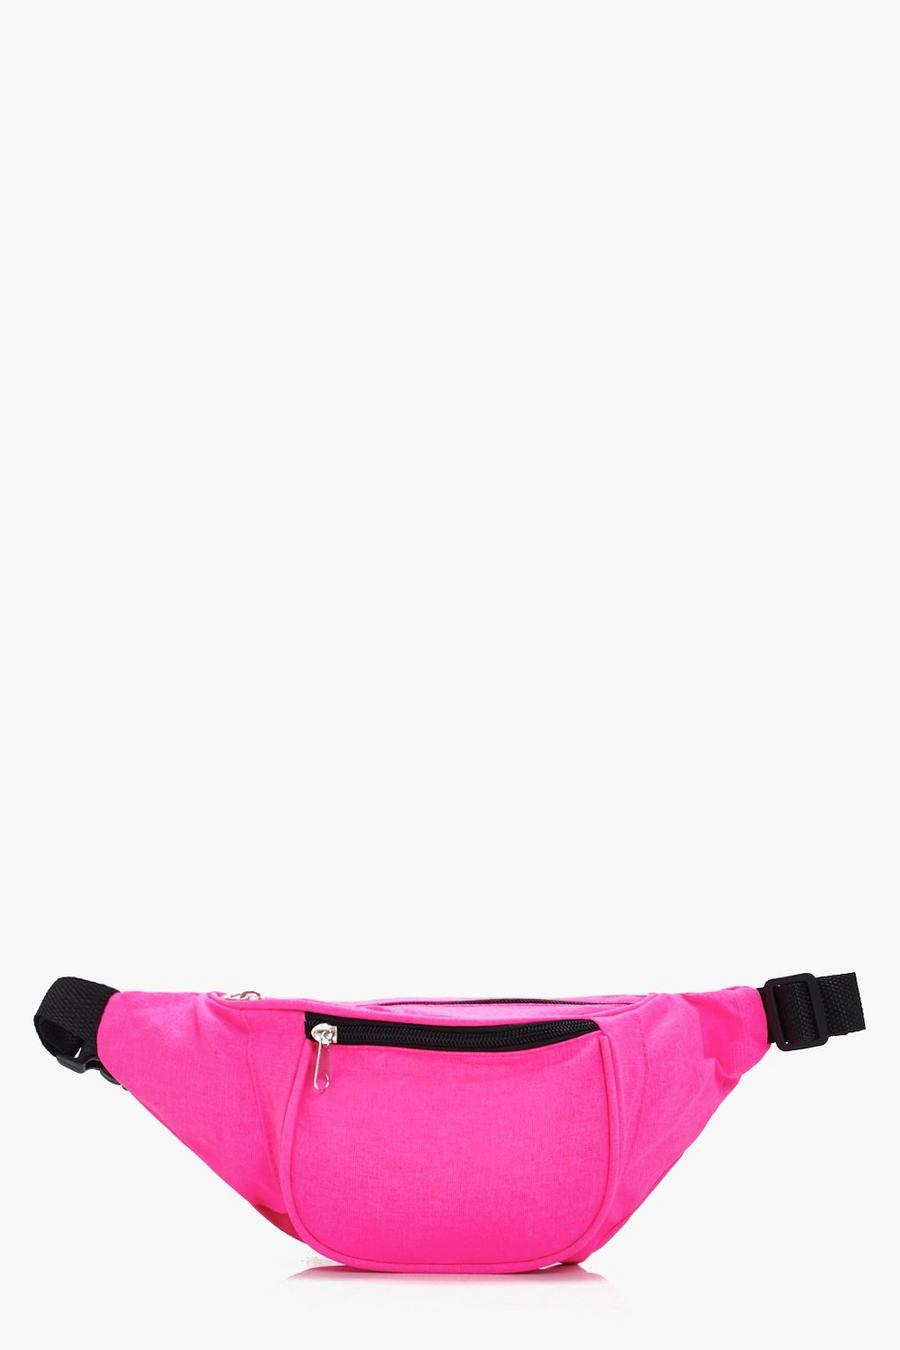 Pink Katie Bright Neon Fanny Pack image number 1